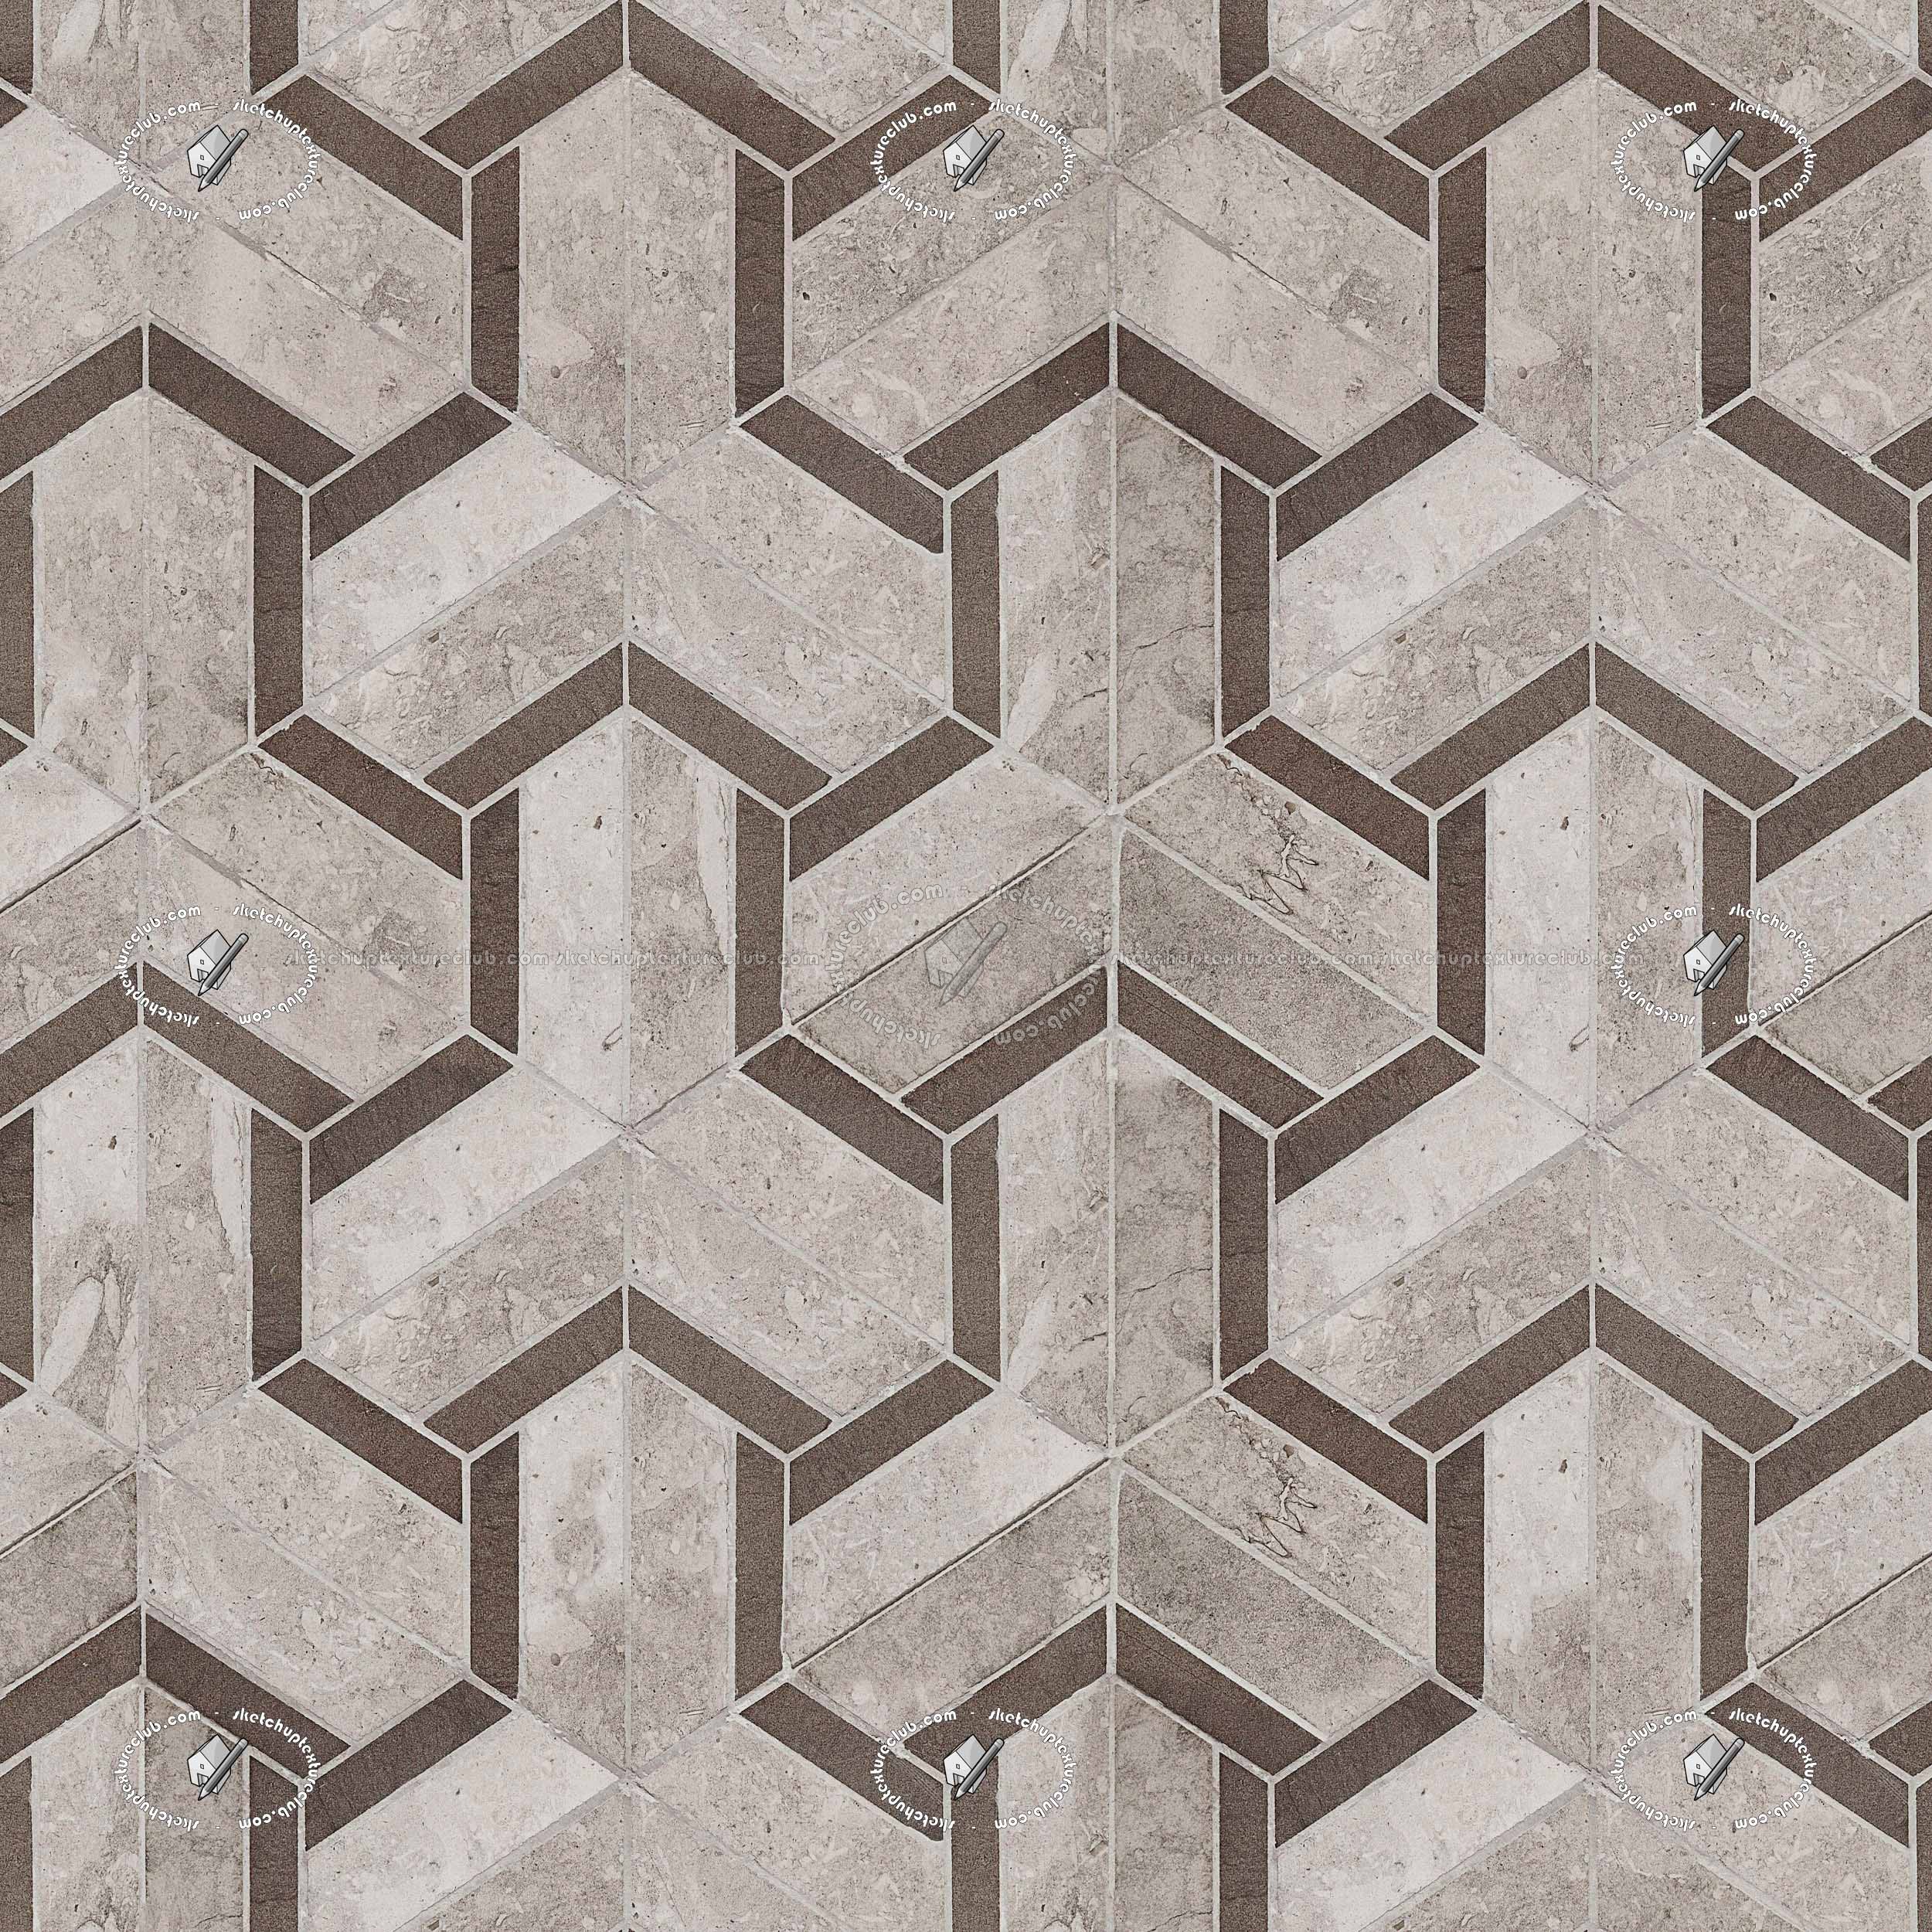 Tile Trials: Exploring Patterns Textures And Applications For Tiles